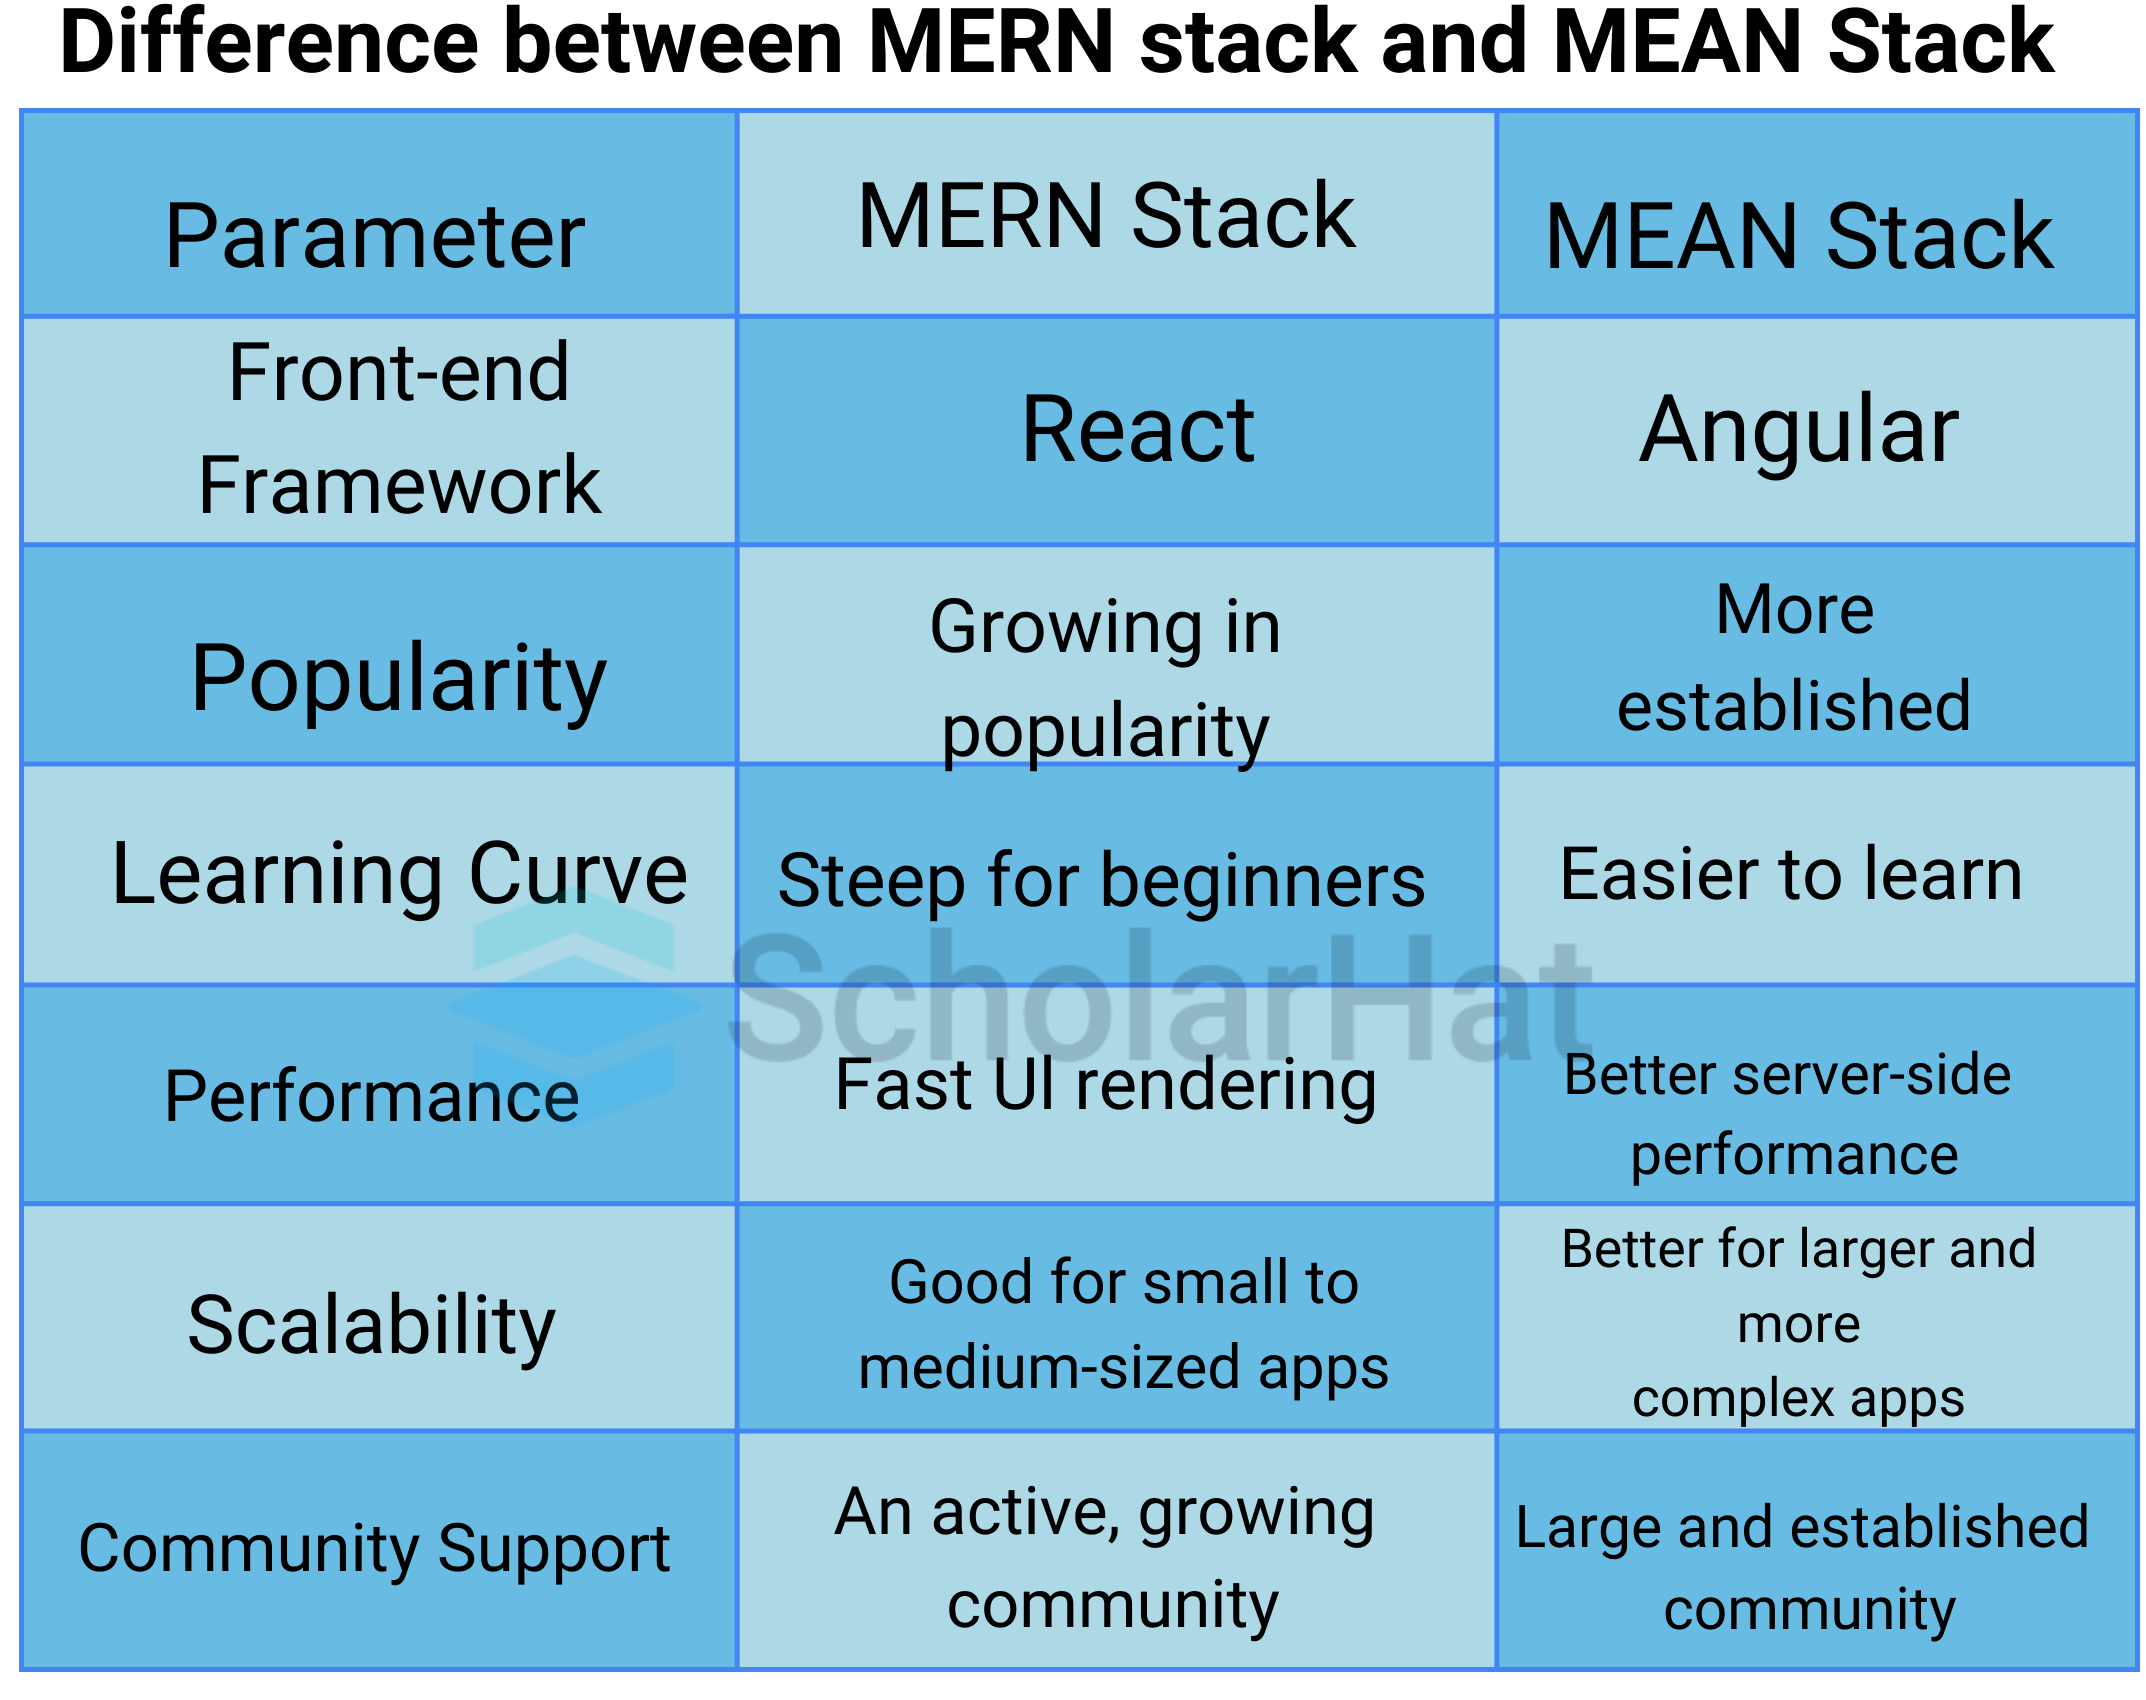 MEAN Vs MERN: Difference in a nutshell